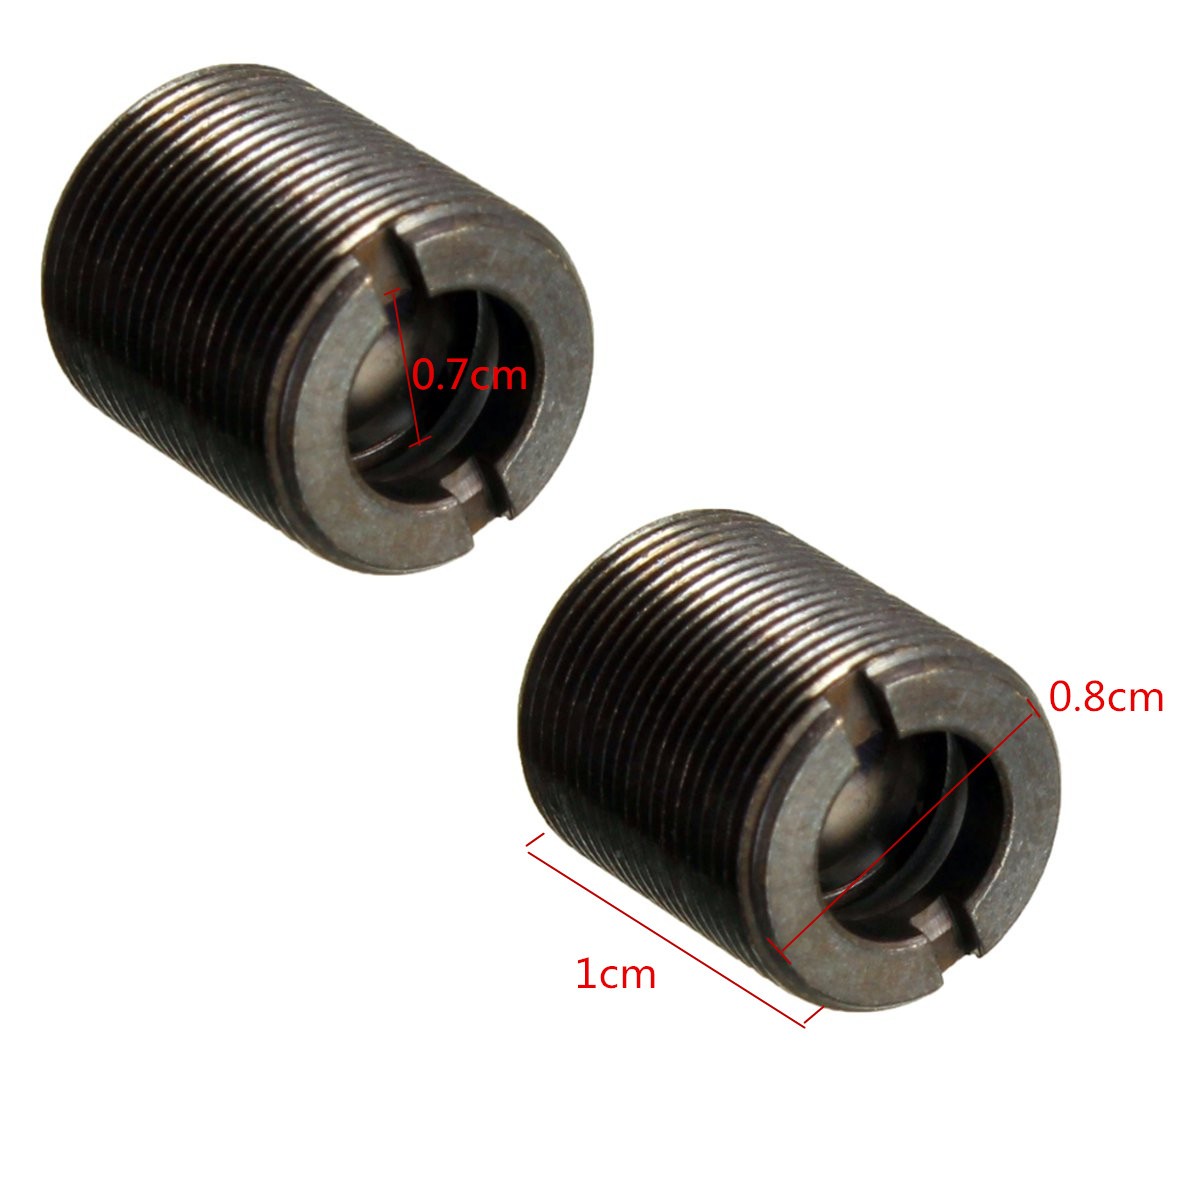 Triple Glazing Focusing Lens Collimating Coated Glass Lens Blue Laser Diode 405nm-450nm 12